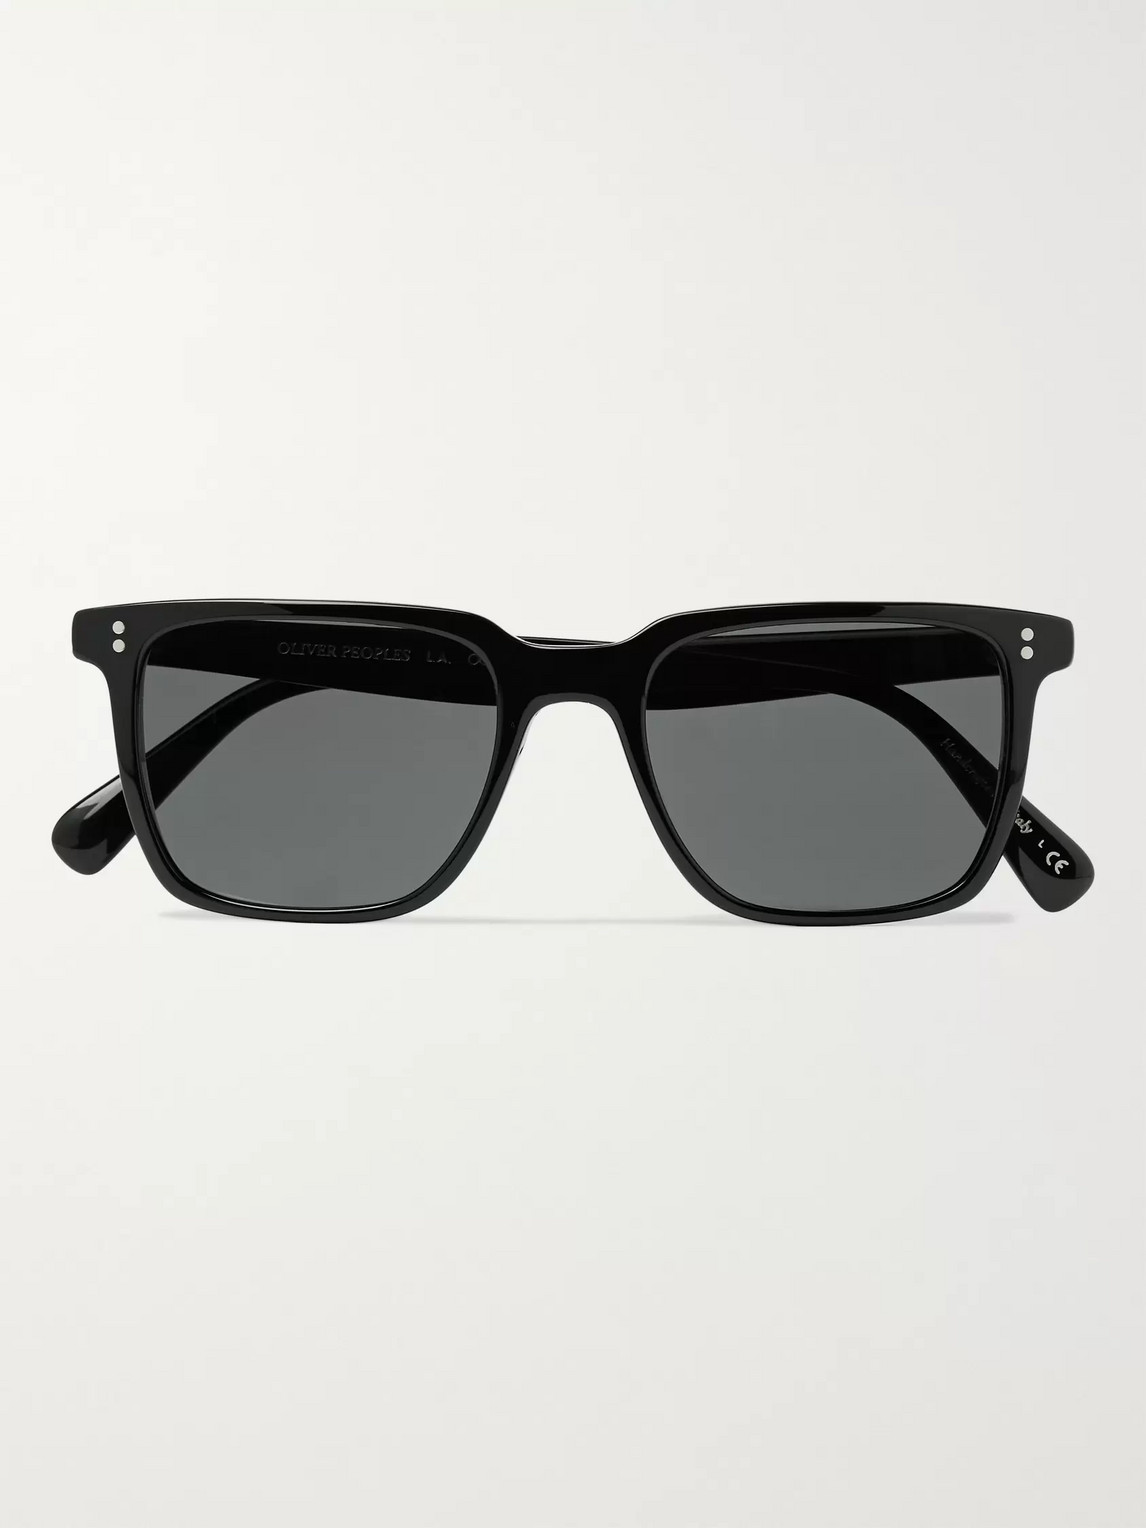 OLIVER PEOPLES LACHMAN SQUARE-FRAME ACETATE SUNGLASSES